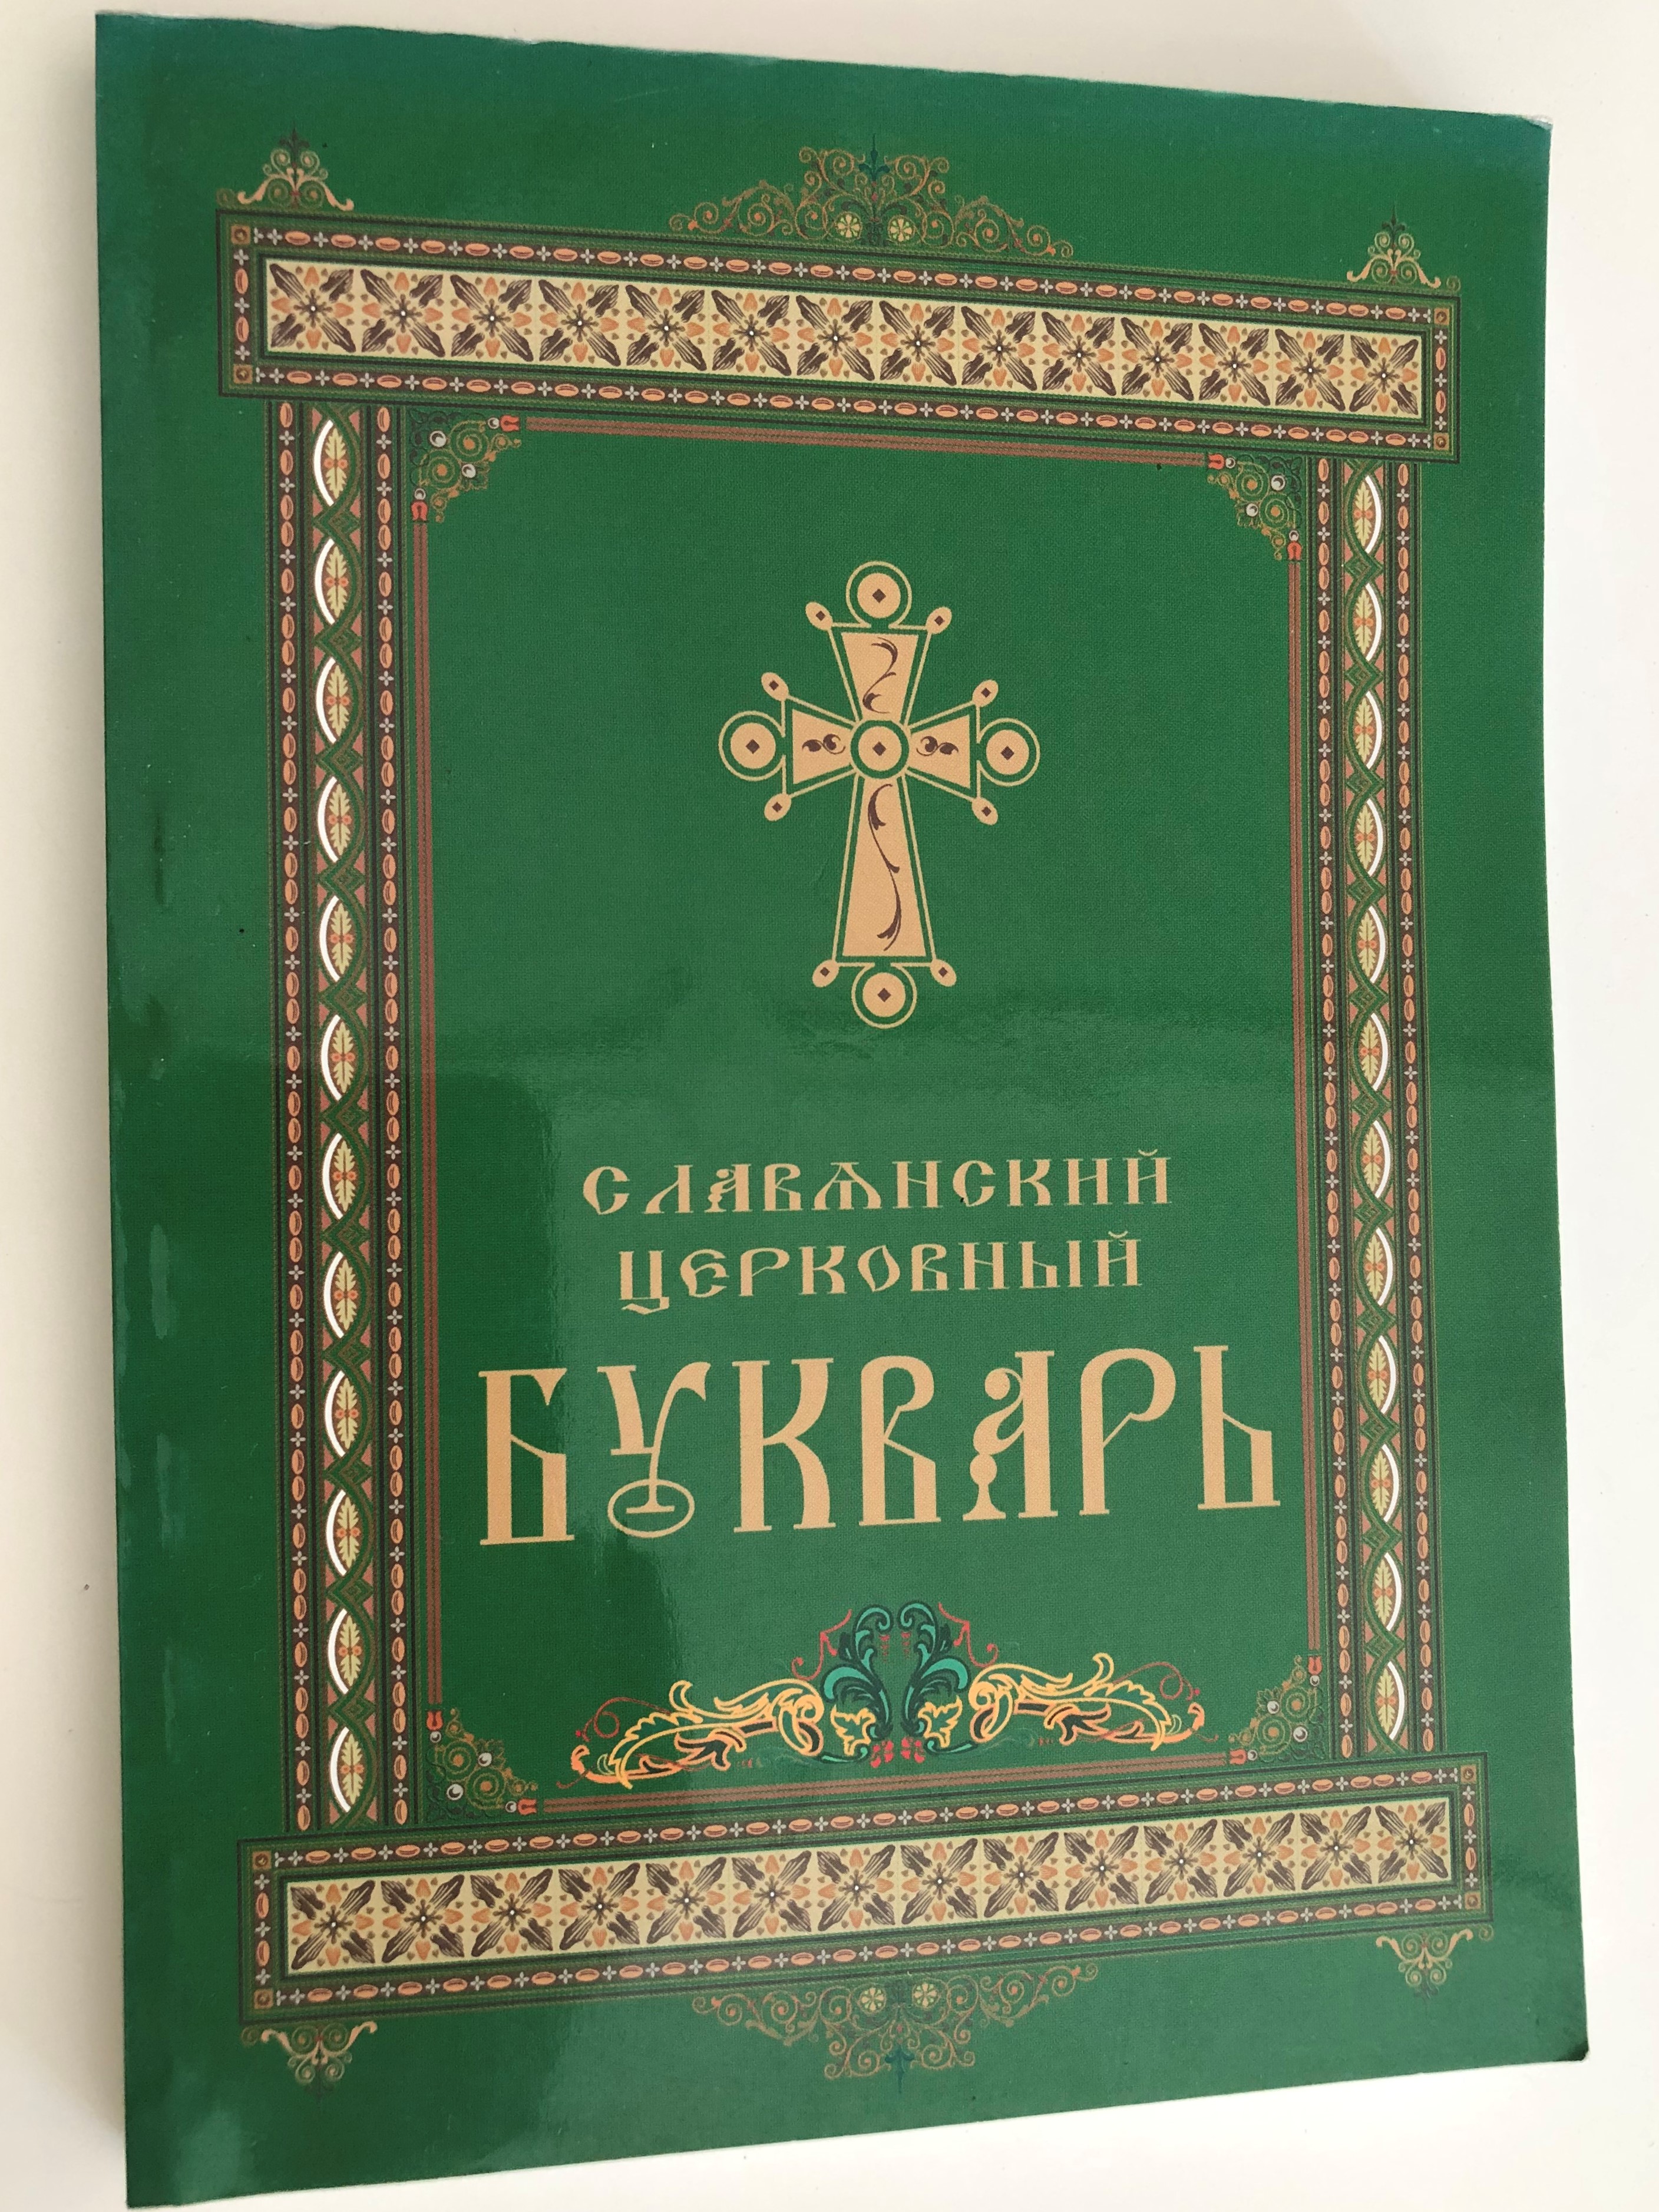 -slavonic-church-russian-letterbook-learn-to-read-the-orthodox-liturgical-texts-paperback-2015-1-.jpg